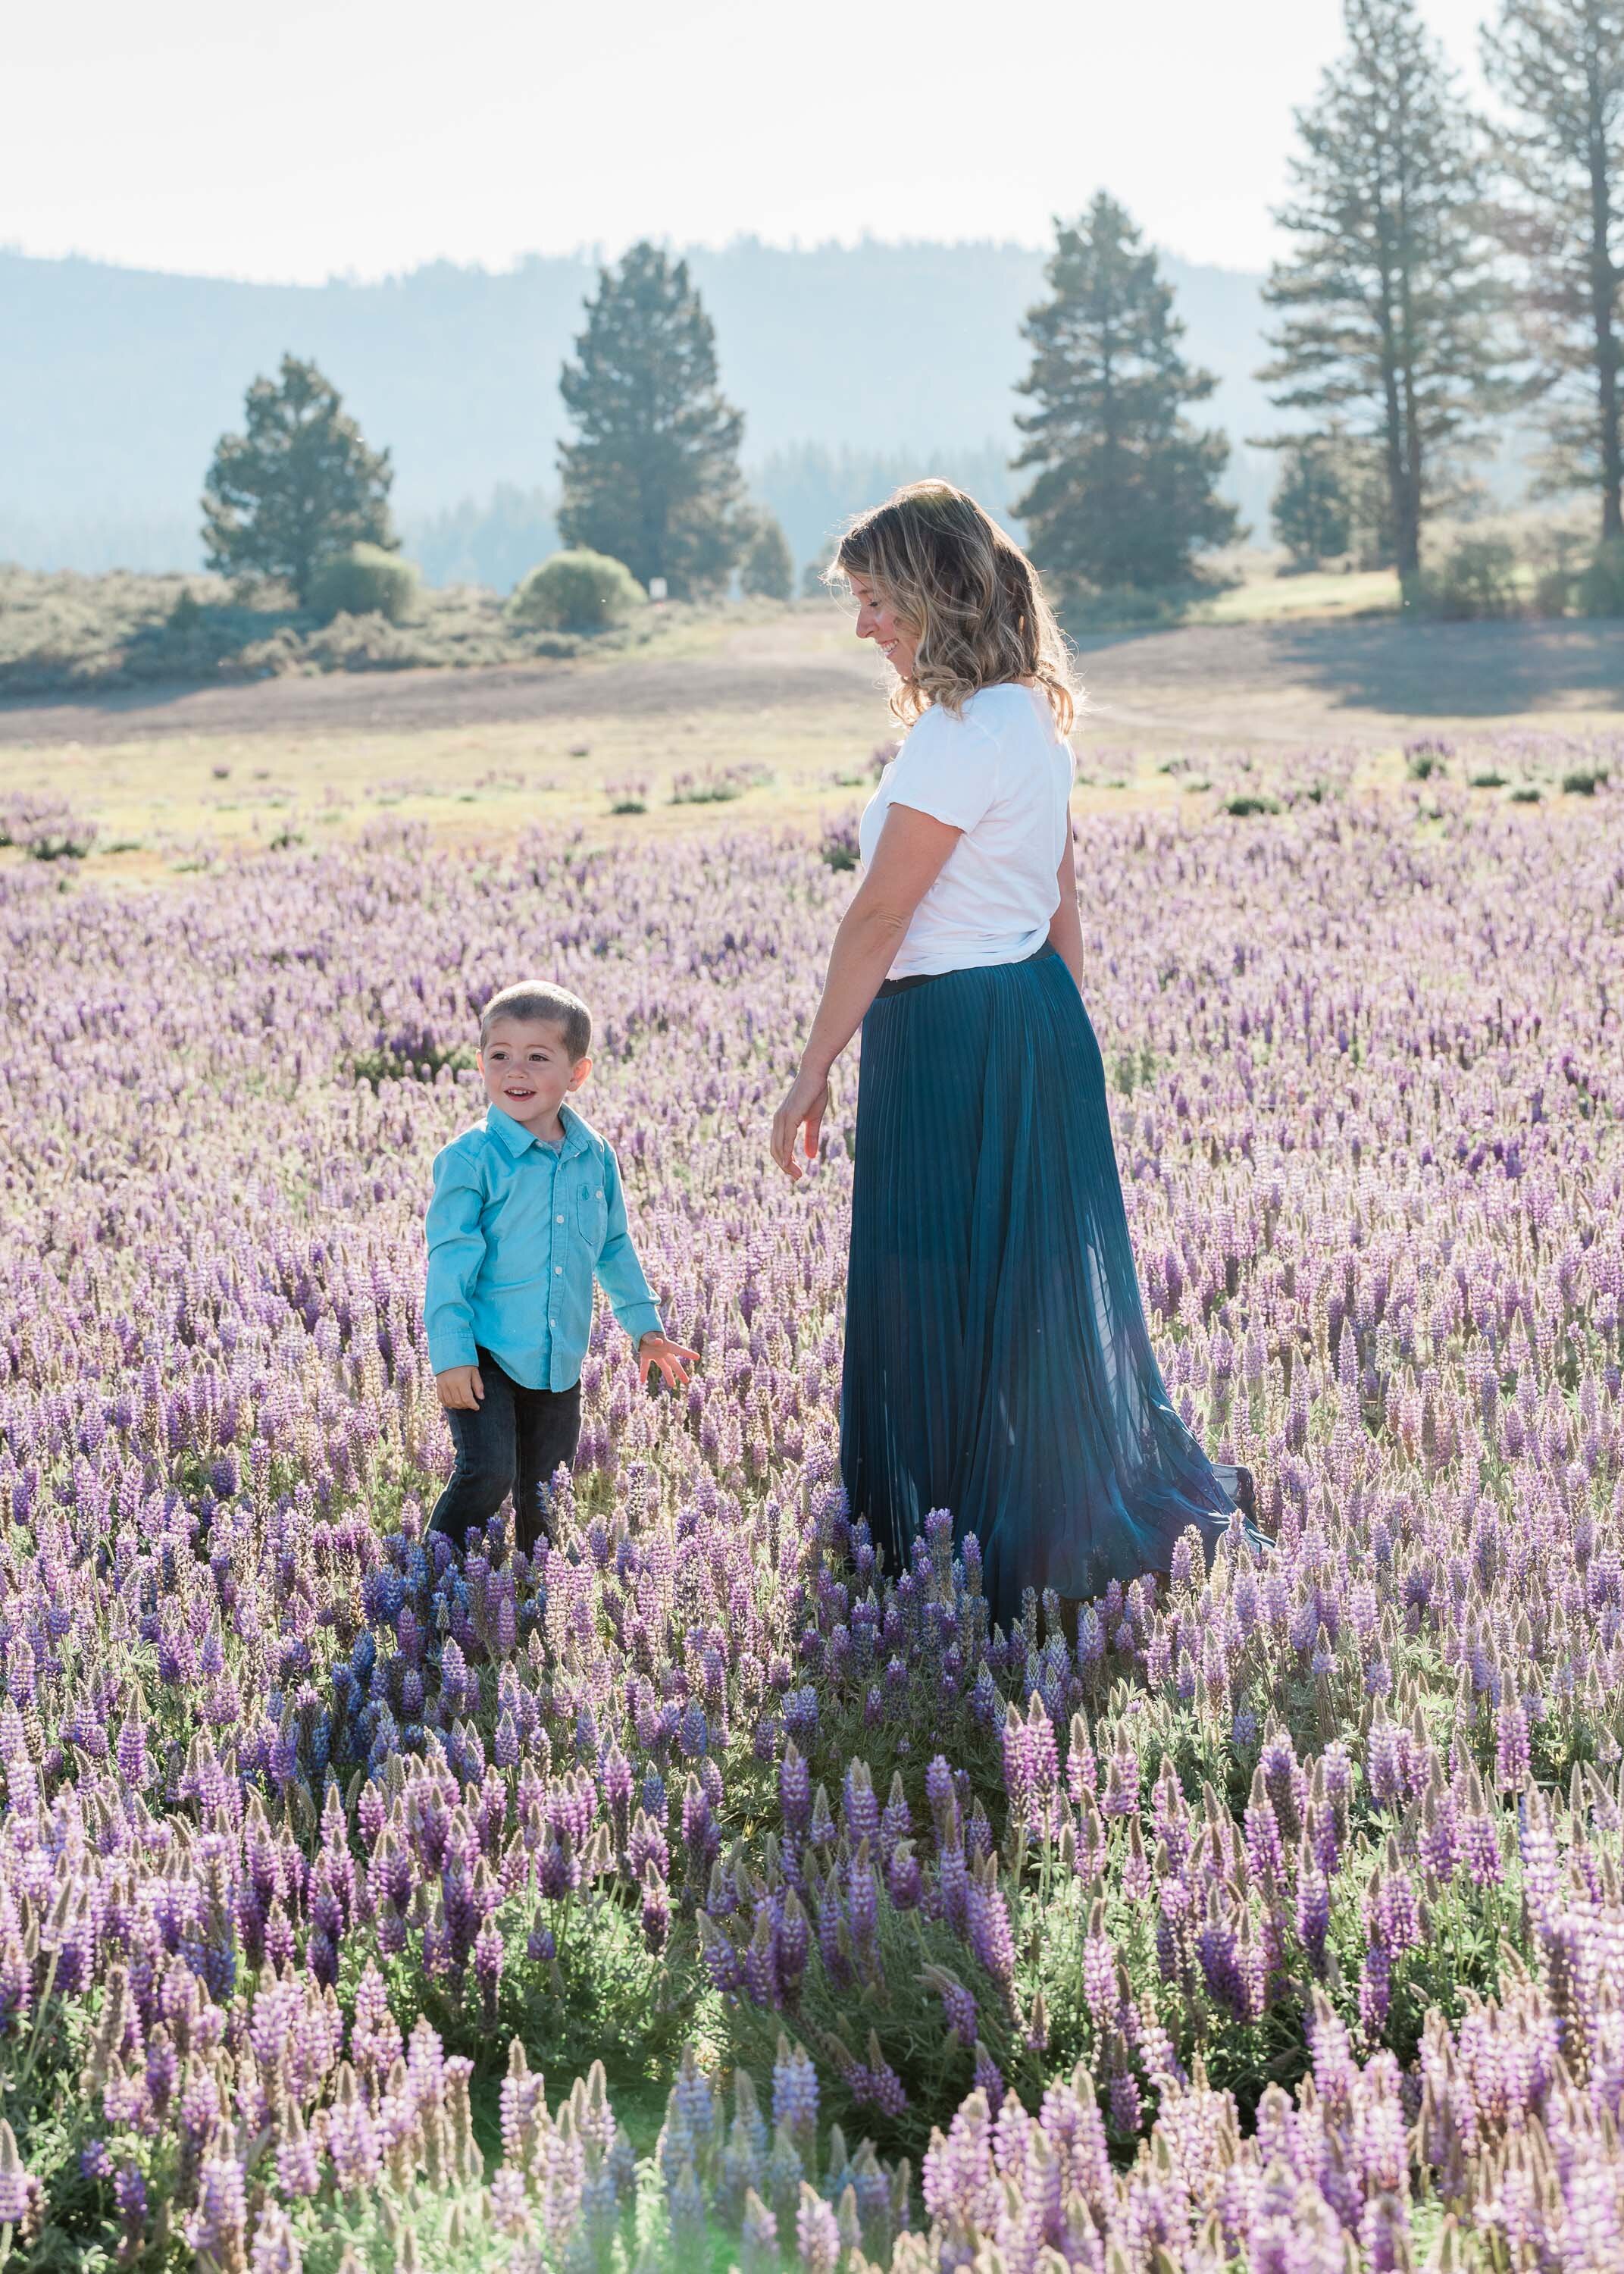 Lupine Wildflowers in Truckee, Family Portrait by Kelli Price Photography